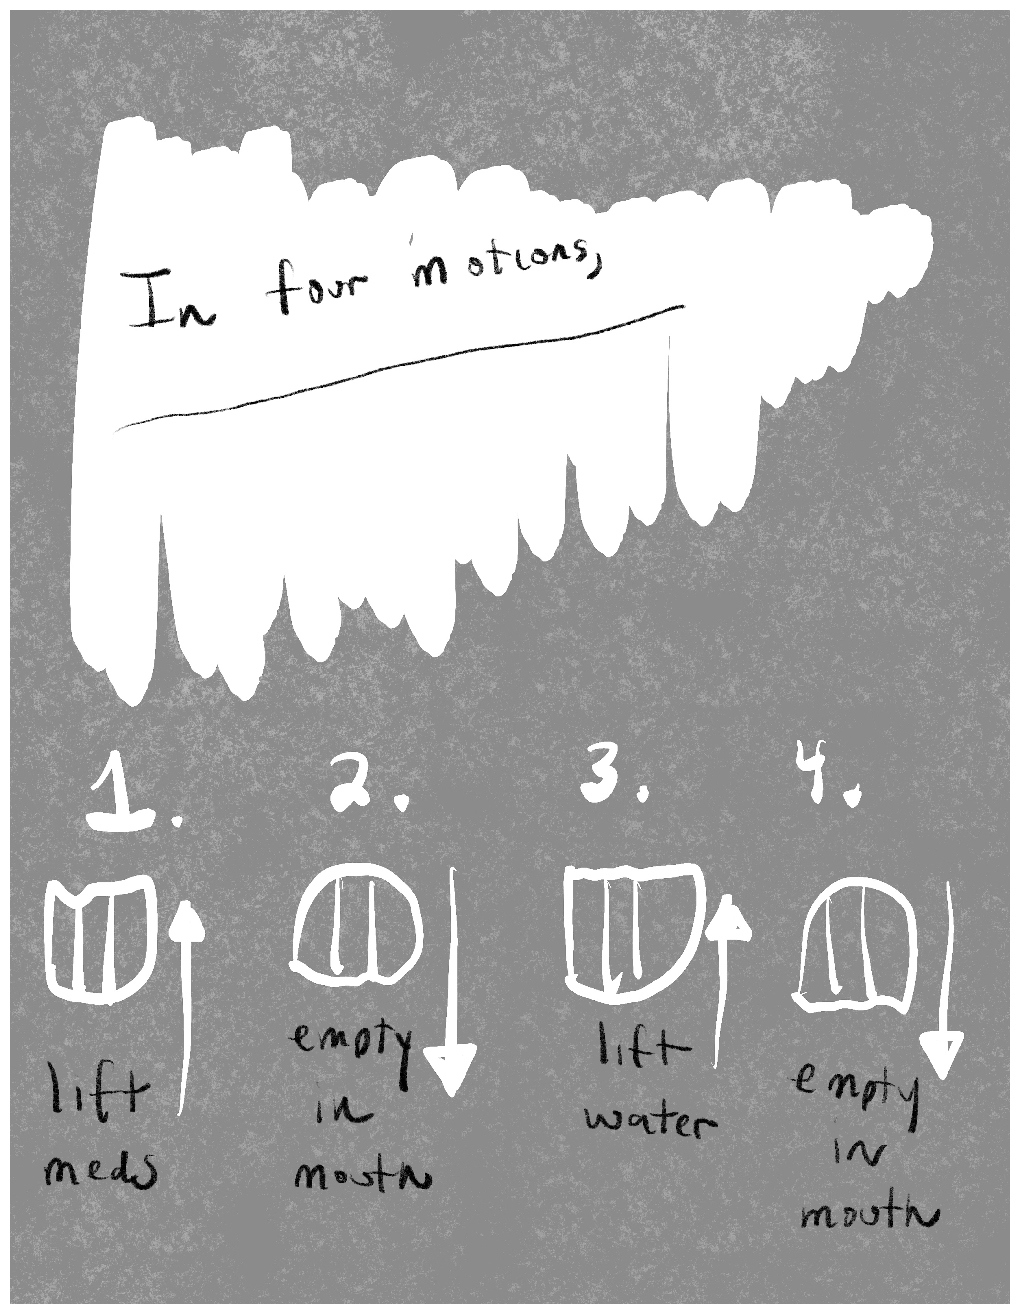 Panel two of a four-panel comic called 'Reclaiming reality', consisting of white line drawing and hand written black handwritten text against a mottled grey background. Text in the top half of the panel says  "In four motions,". Beneath this is a row of four crudely drawn cups with the numbers 1,2,3,4 written above them. Cup 1 is the right way up and has an arrow pointing upwards next to it. Beneath it is written "lift meds". Cup 2 is upside down and has an arrow pointing down next to it. Beneath it is written "empty in mouth". Cup 3 is right way up and has an up arrow next to it. Text beneath it says "life water". Cup 4 is upside down and has a down arrow next to it. Text beneath it says "empty in mouth".